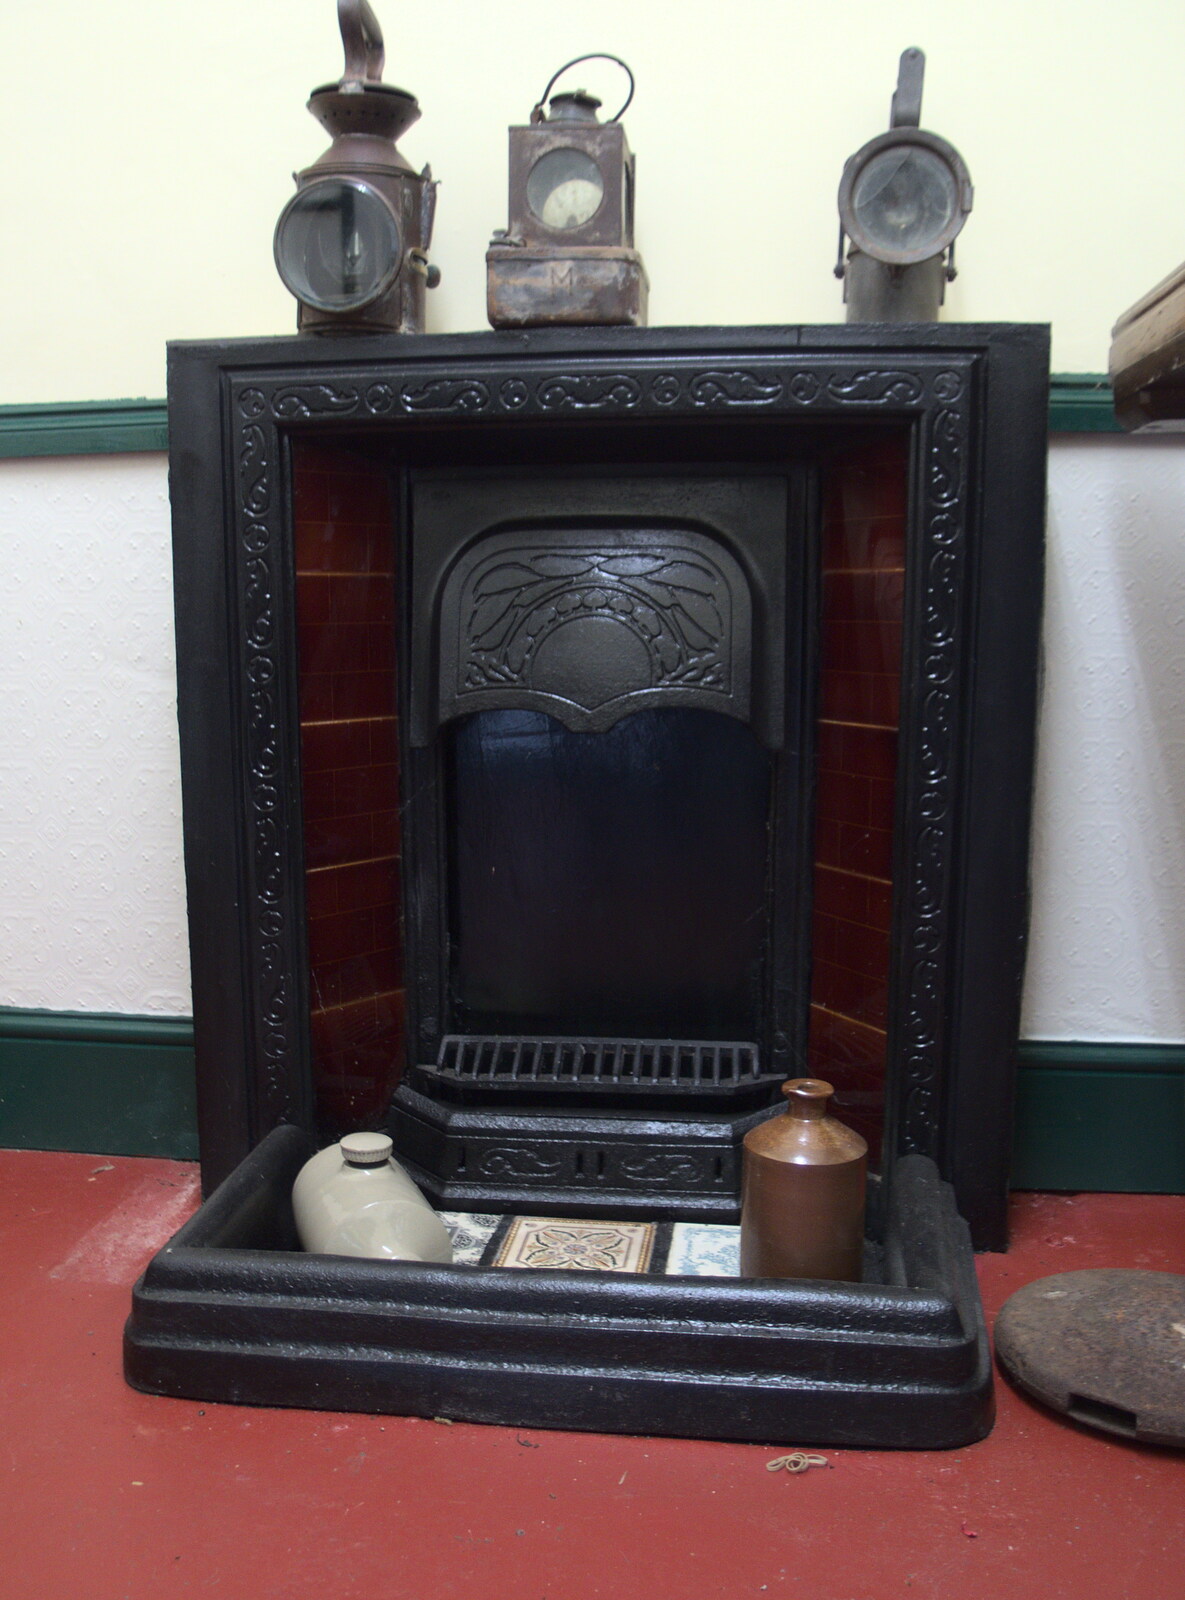 A nice Victorian fireplace from The Humpty Dumpty Beer Festival, Reedham, Norfolk - 22nd July 2017